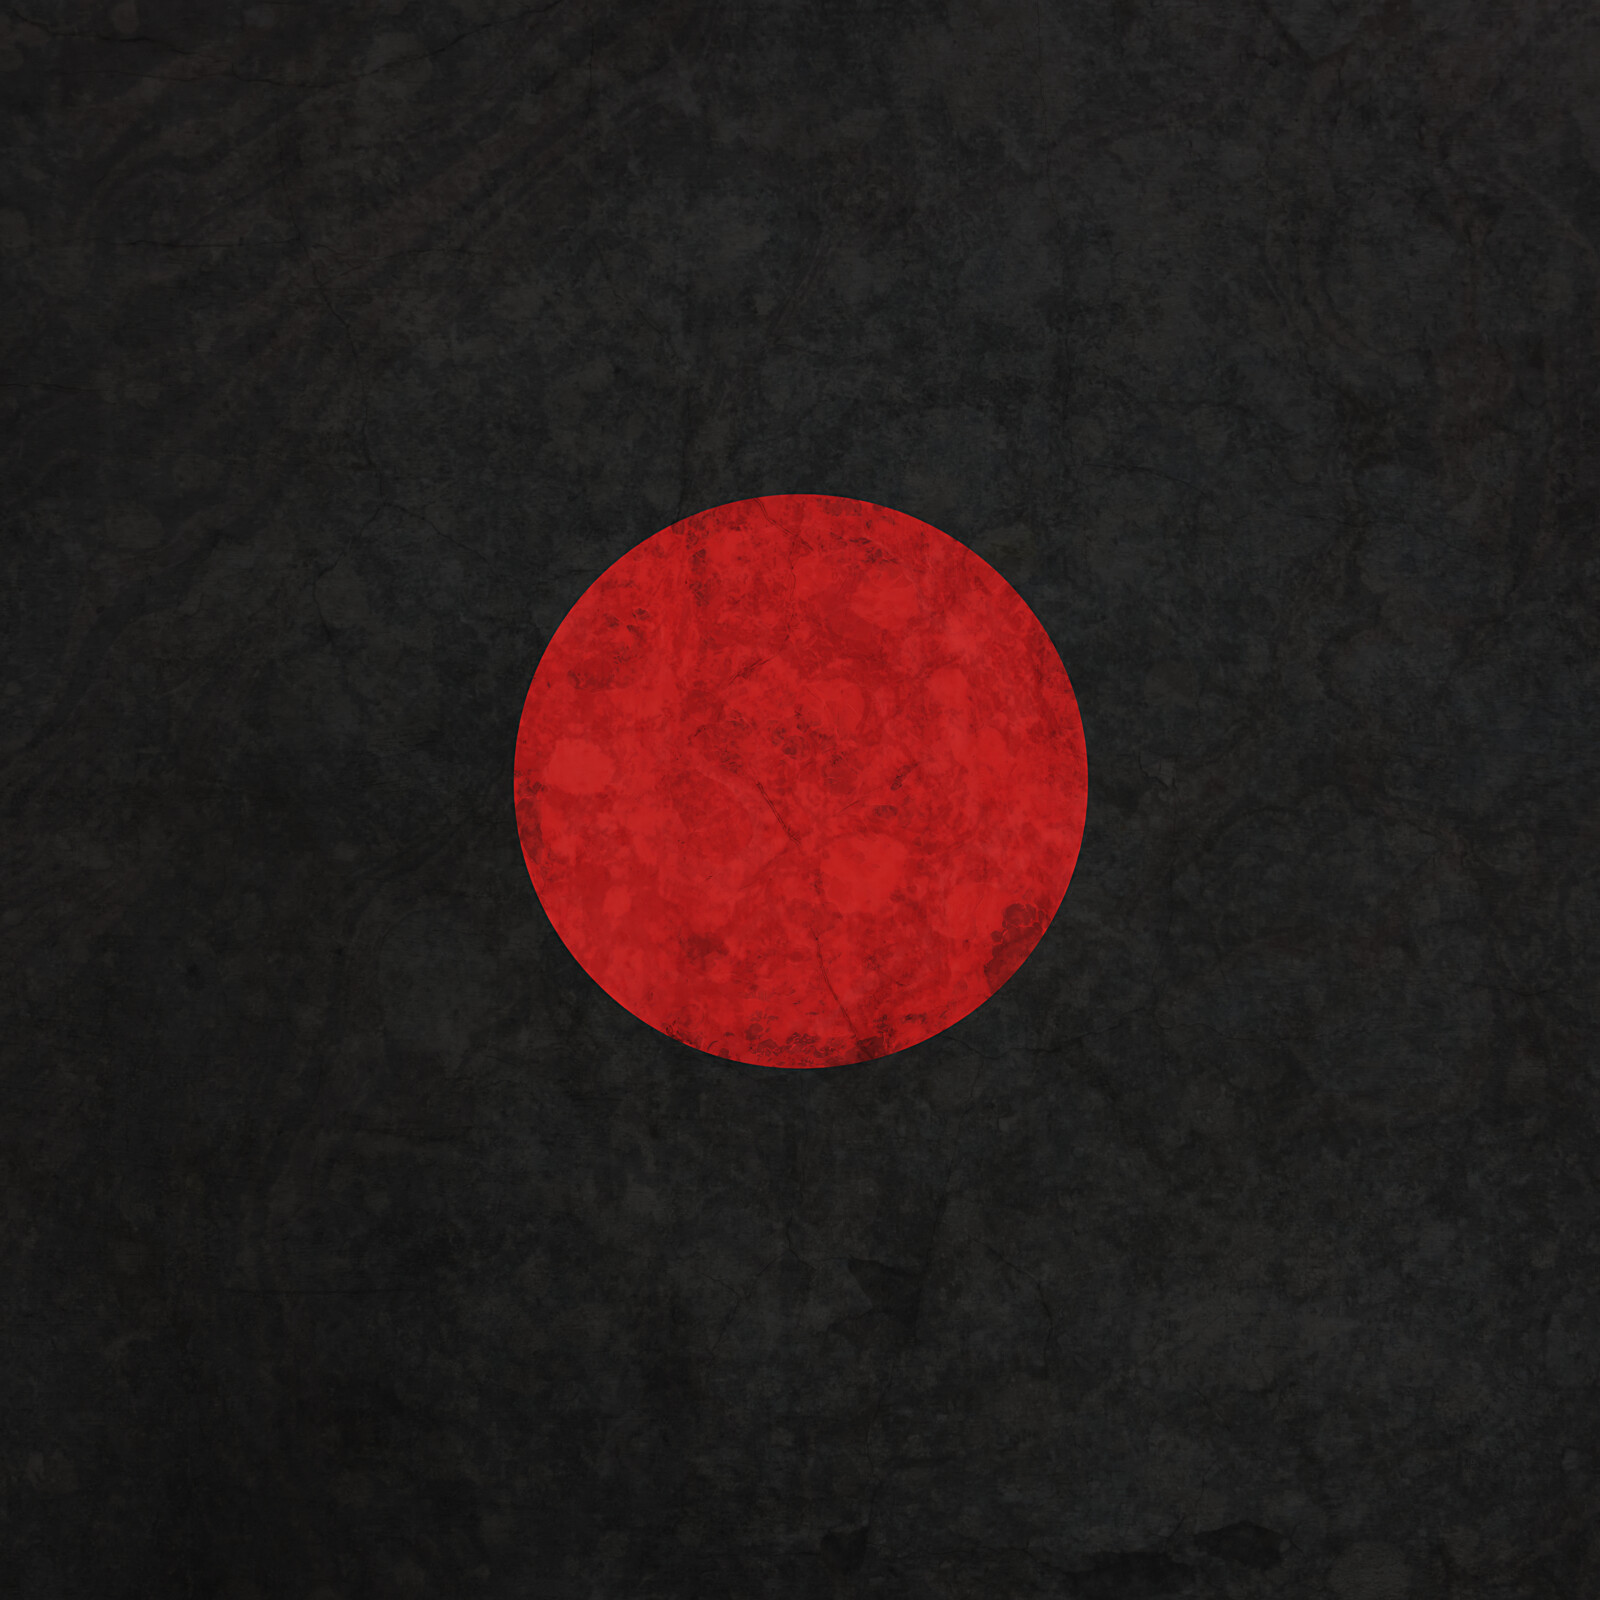 A red circle on a dark background.